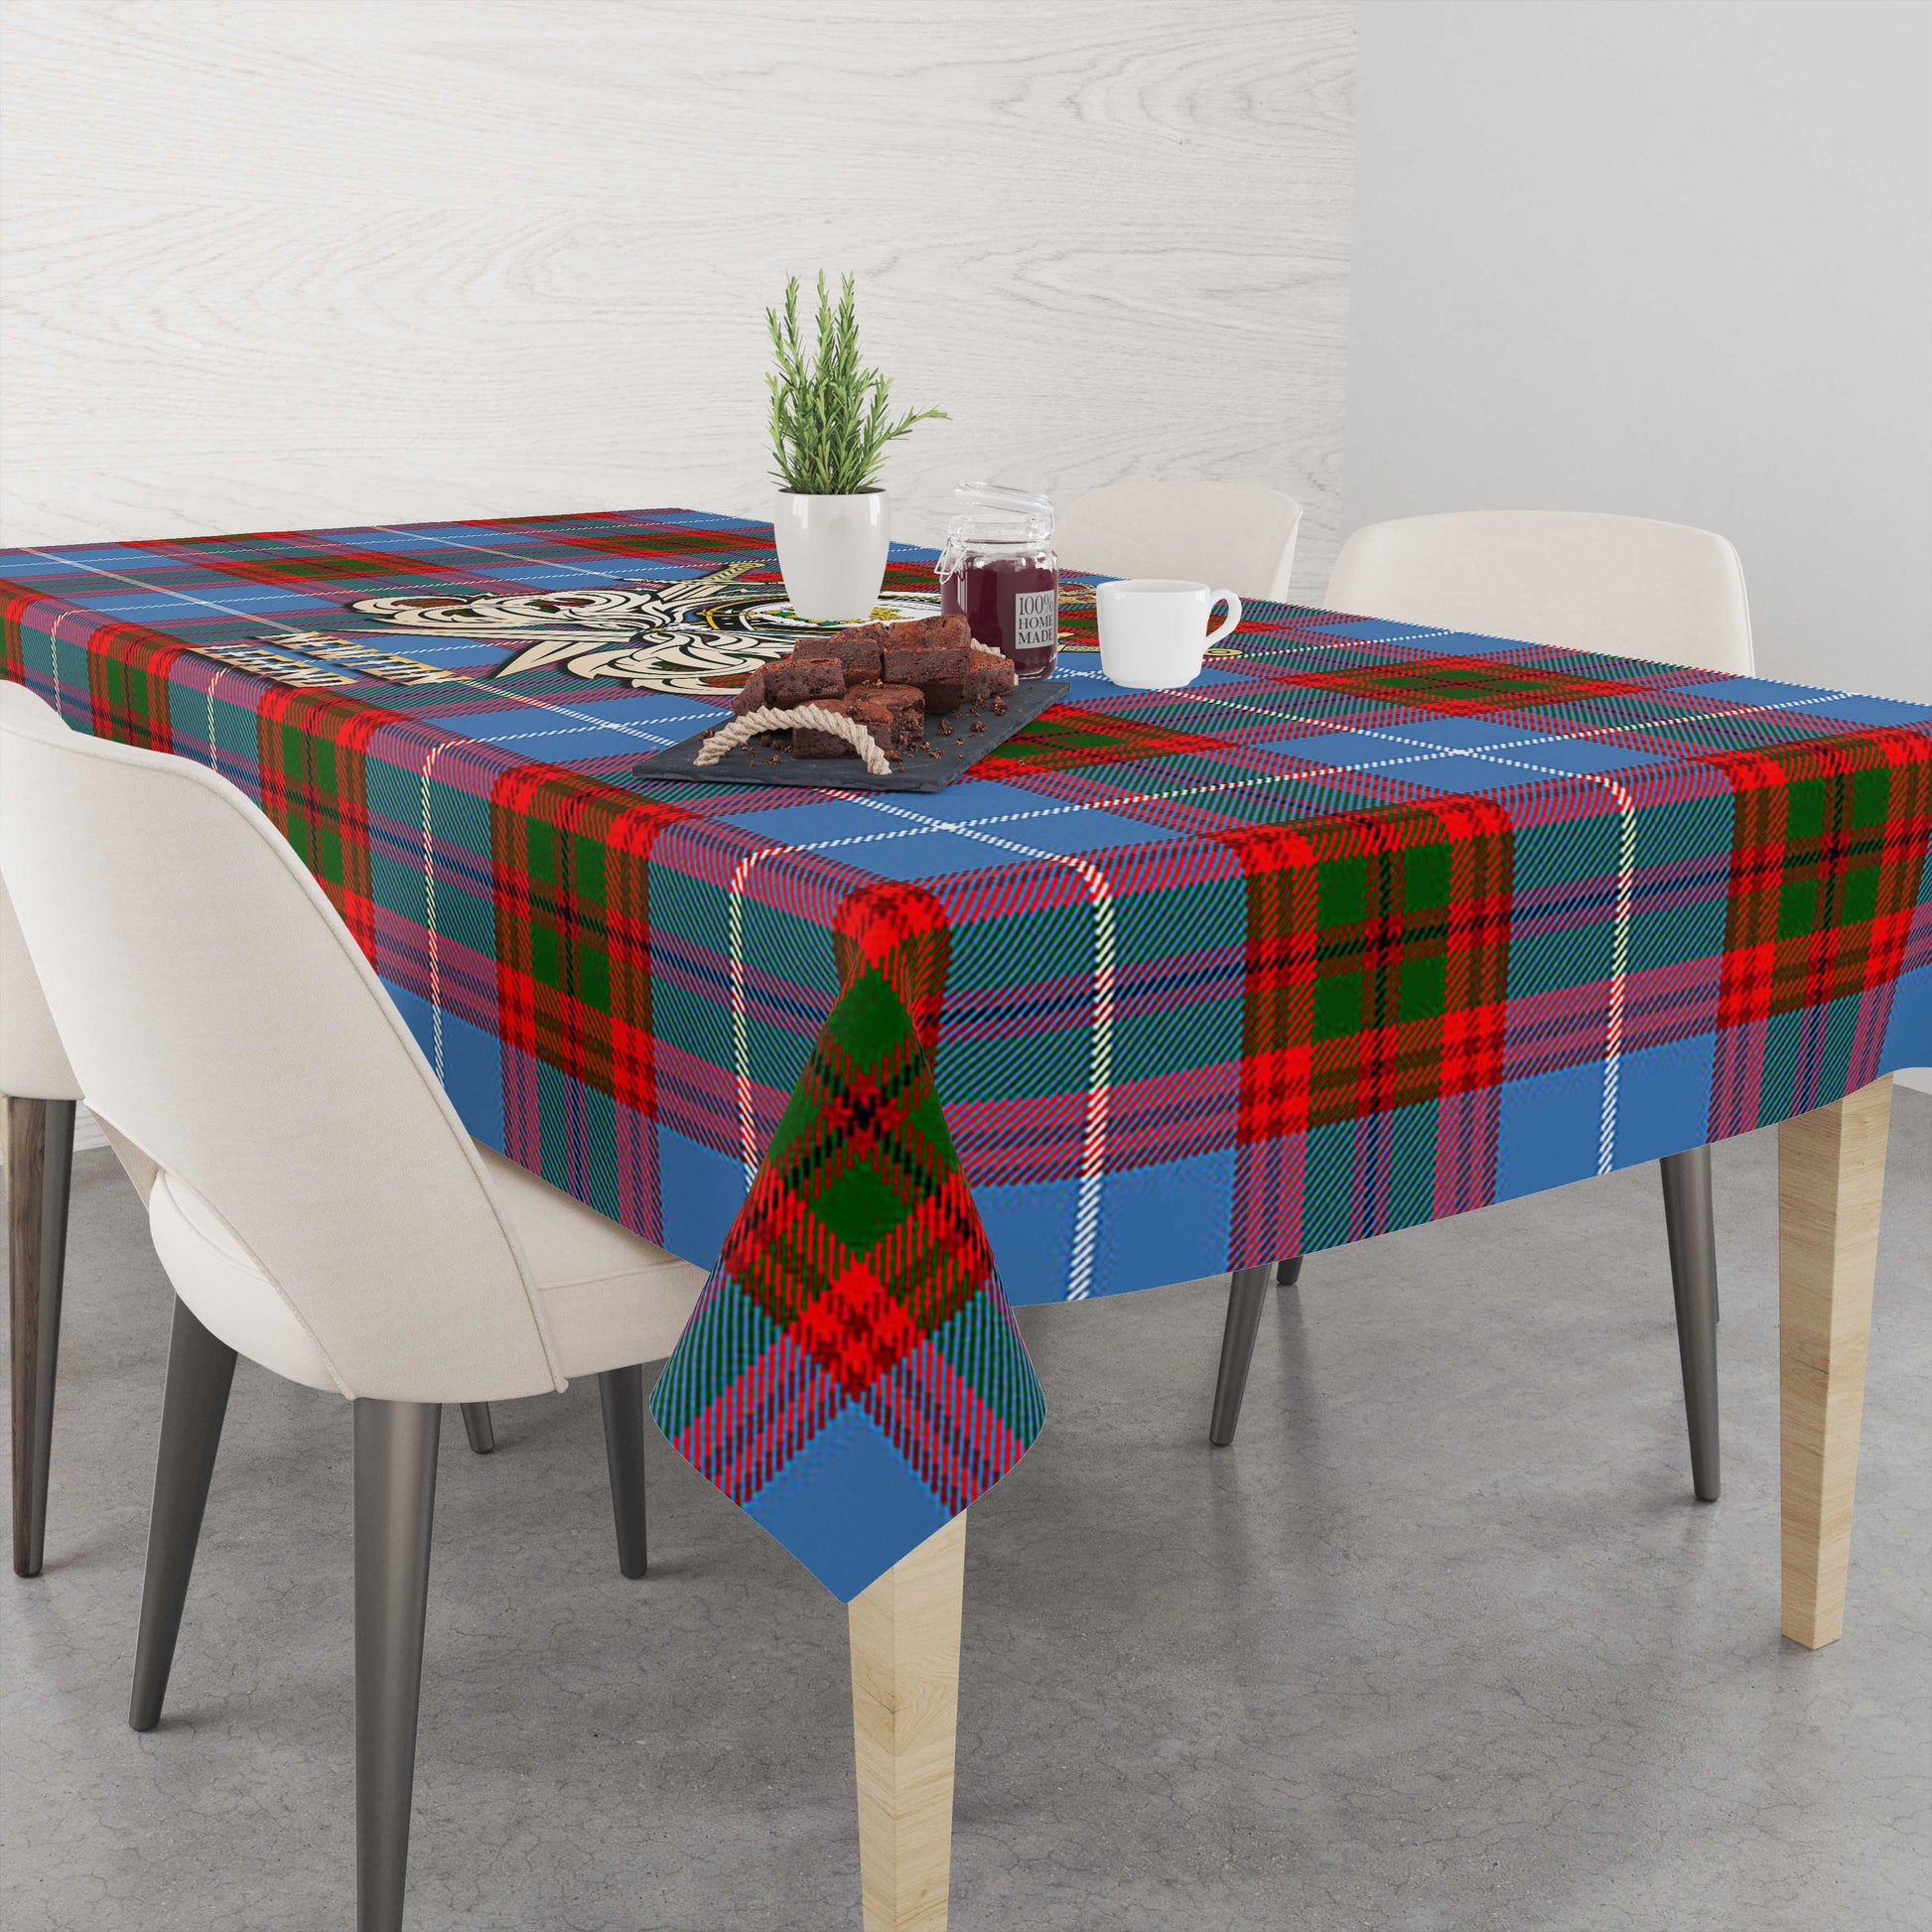 Tartan Vibes Clothing Newton Tartan Tablecloth with Clan Crest and the Golden Sword of Courageous Legacy